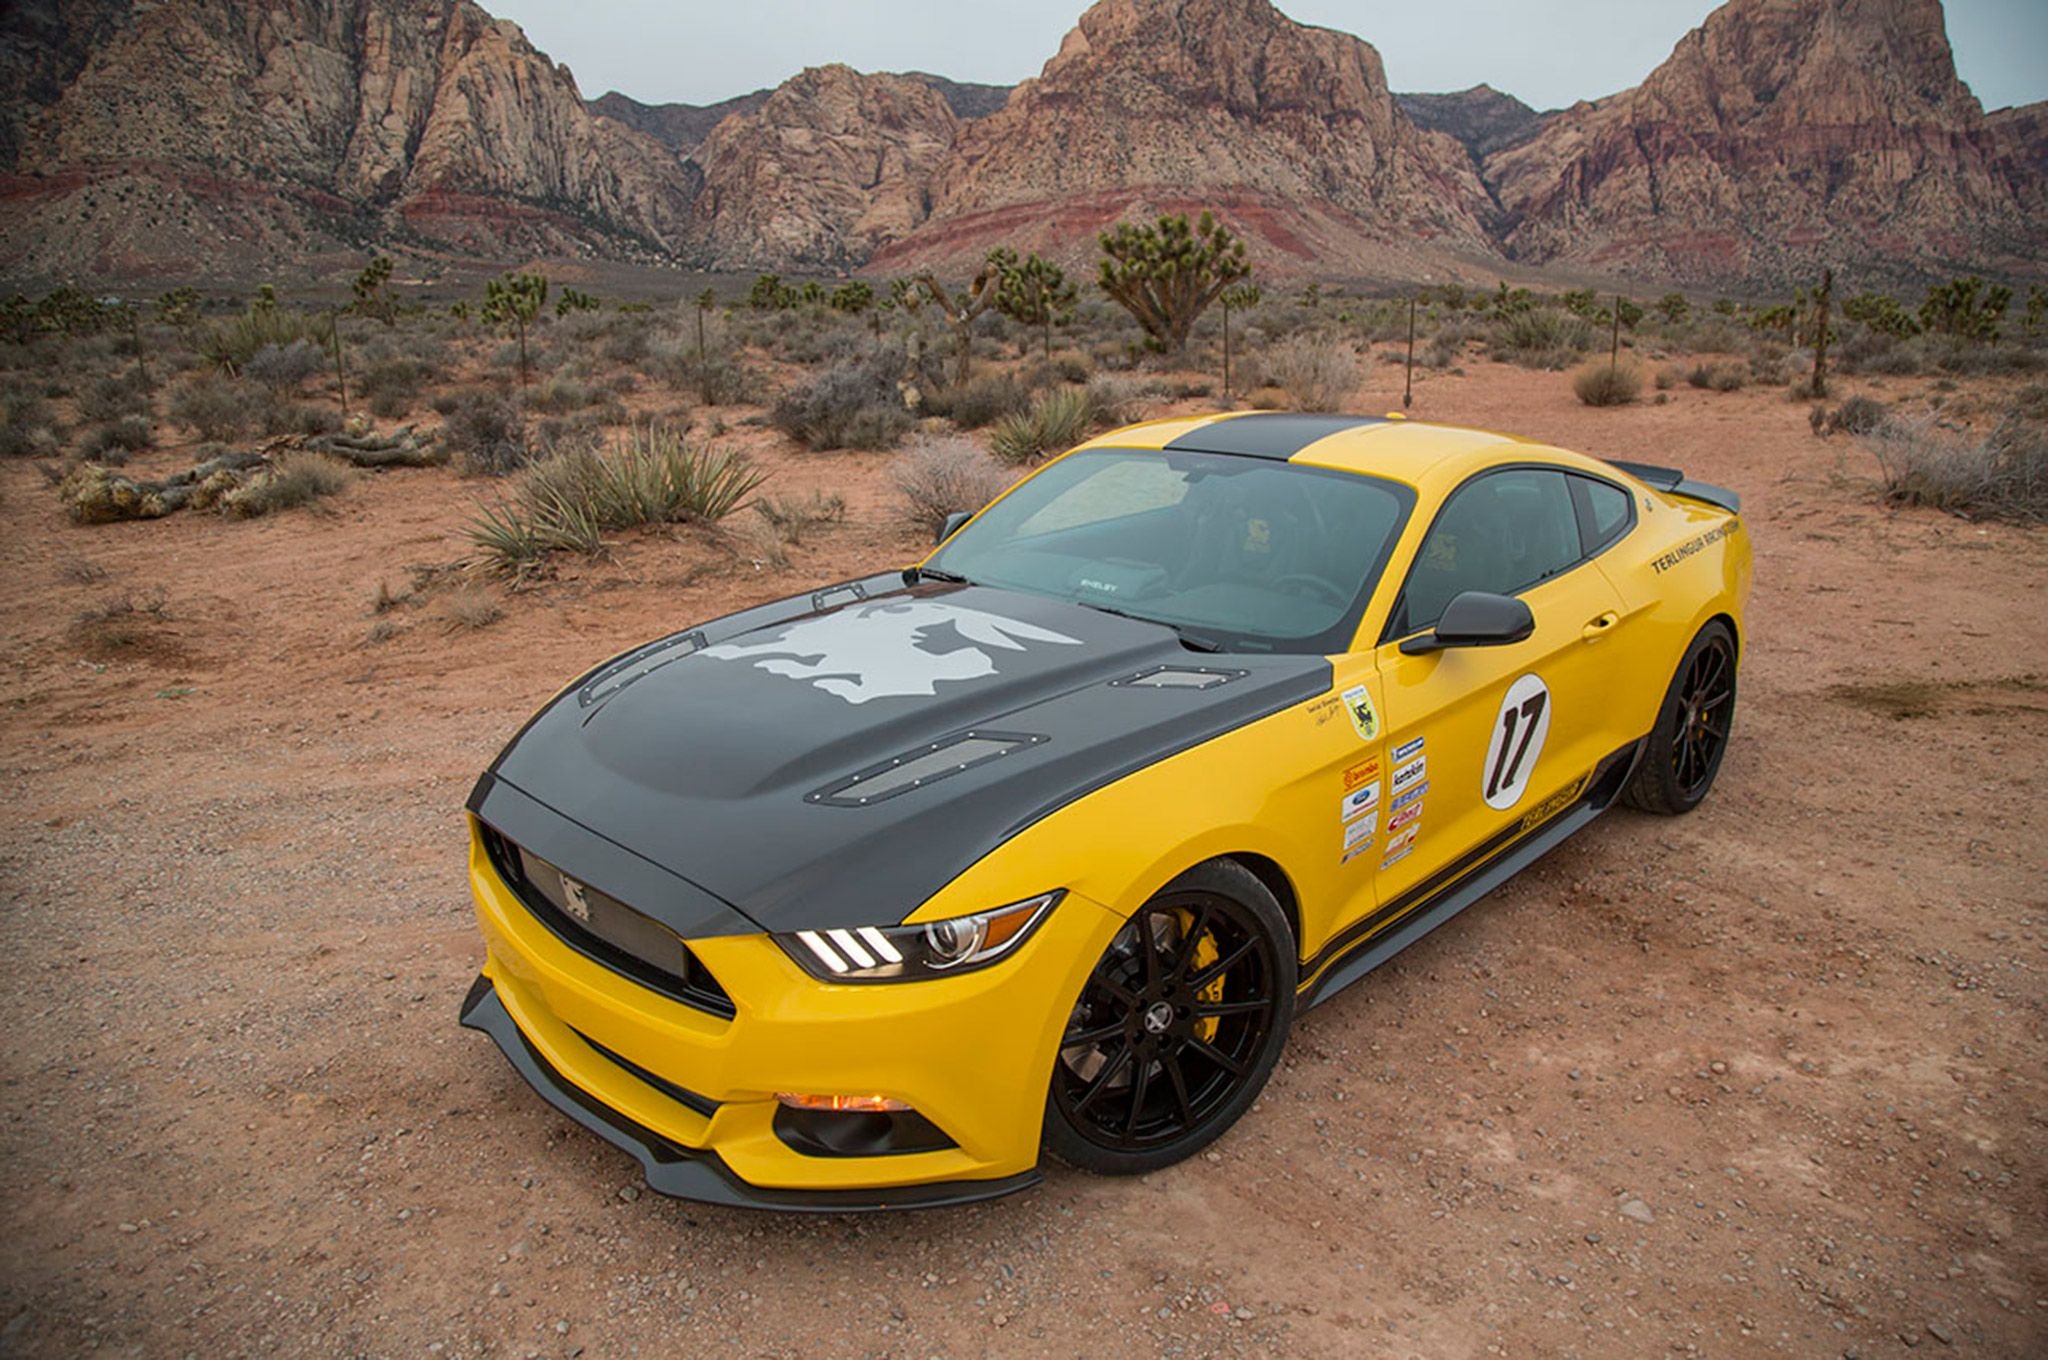 2016, 670hp, Shelby, Gt, Muscle, Race, Racing, Ford, Mustang, G t, Rally Wallpaper